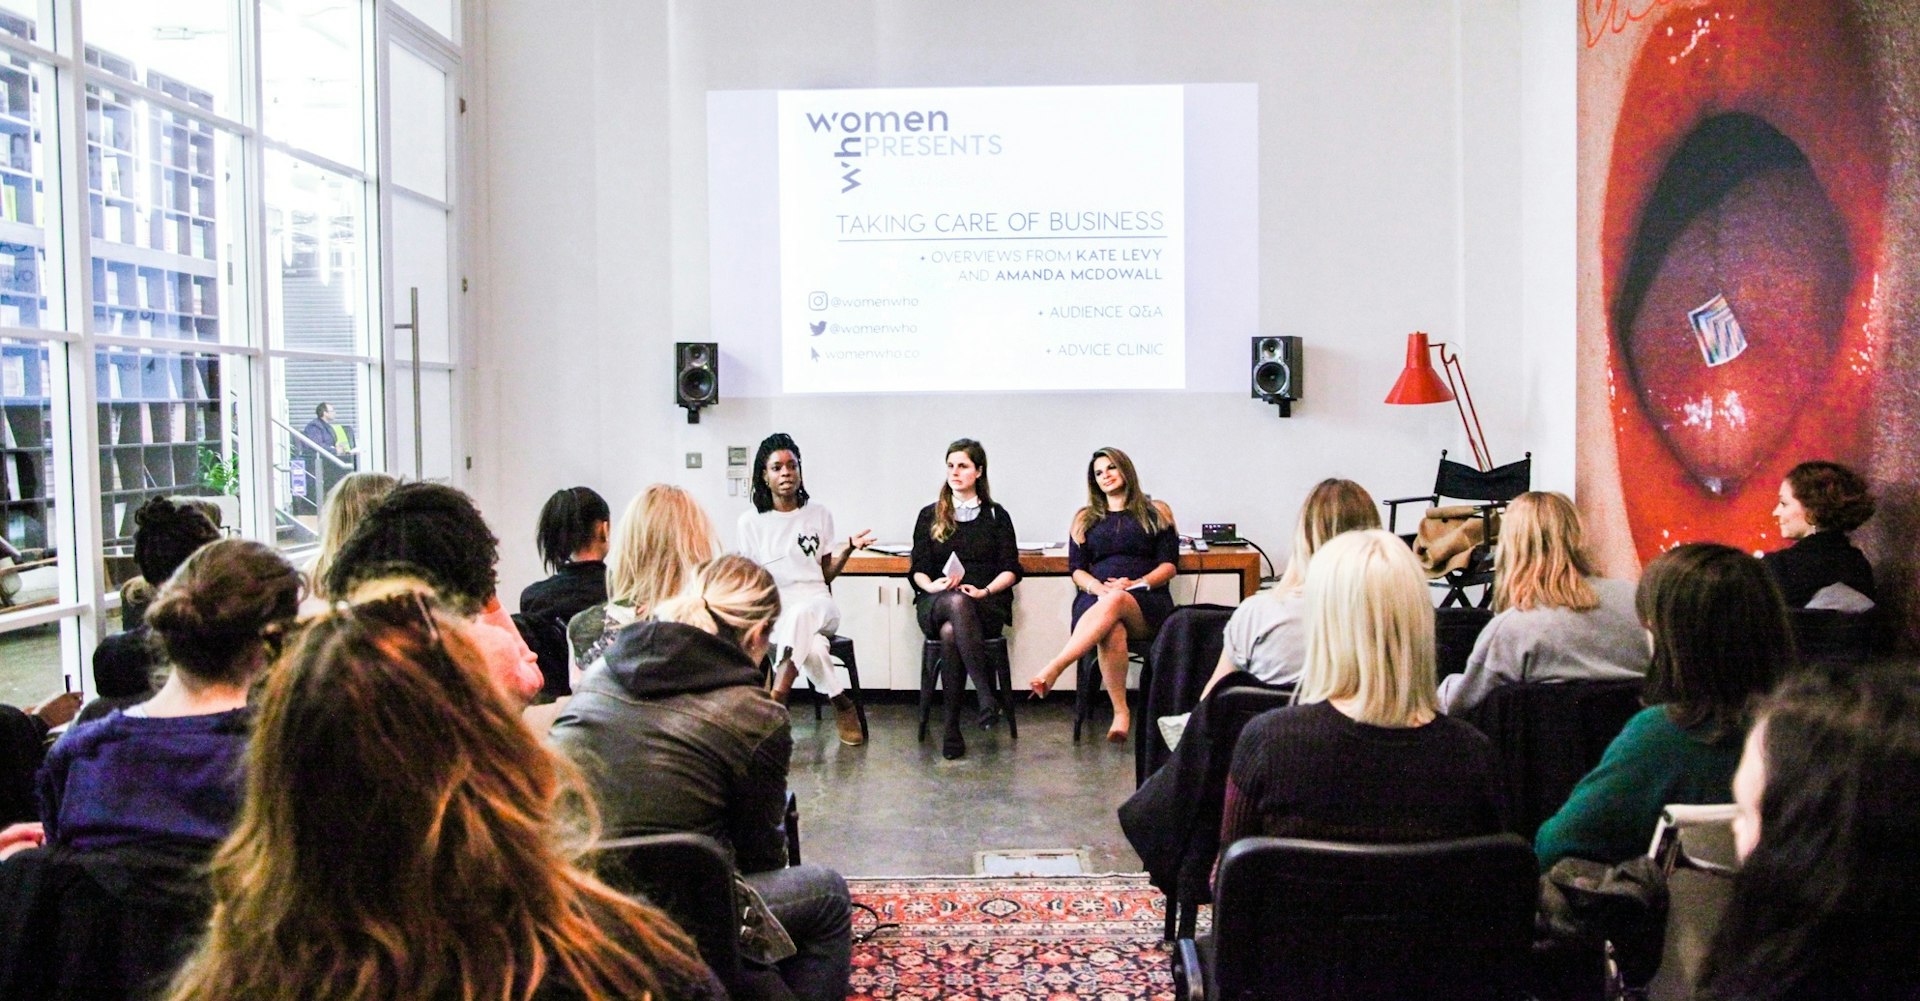 Women in creative industries: It's time to take control of your working life